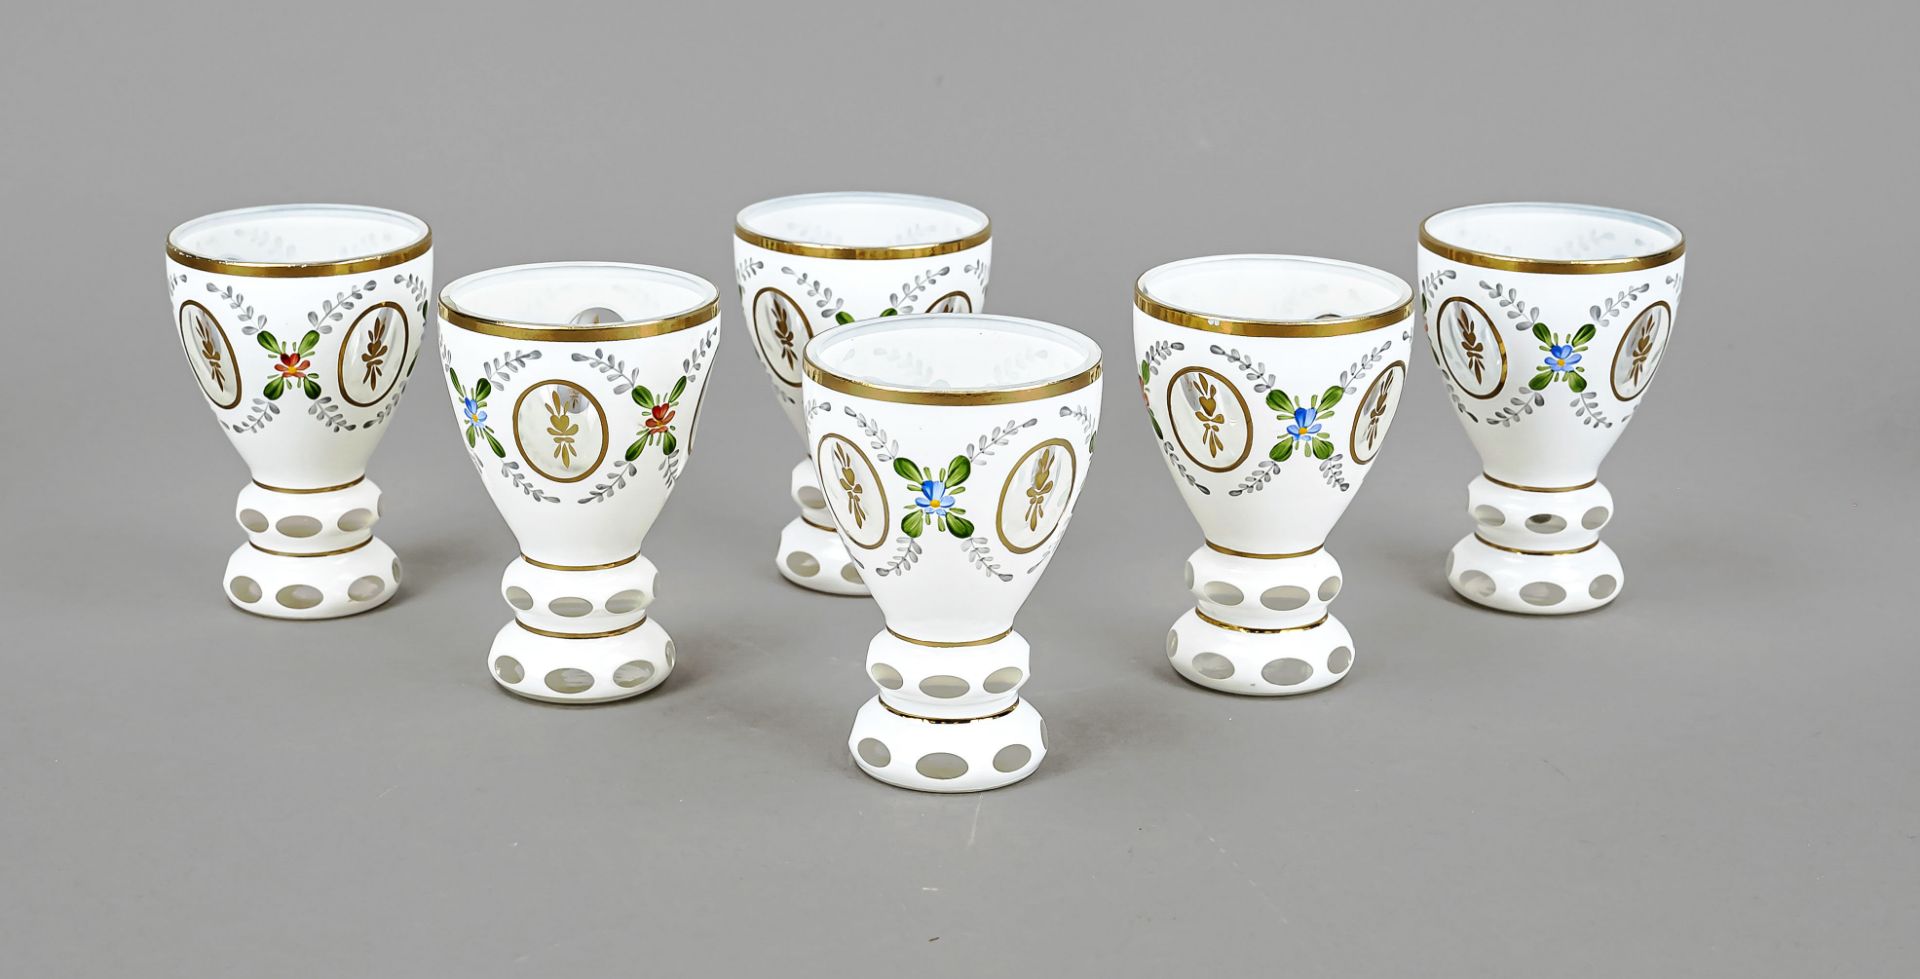 Six beakers, early 20th century, double beaded round base, tulip-shaped bowl, clear glass,